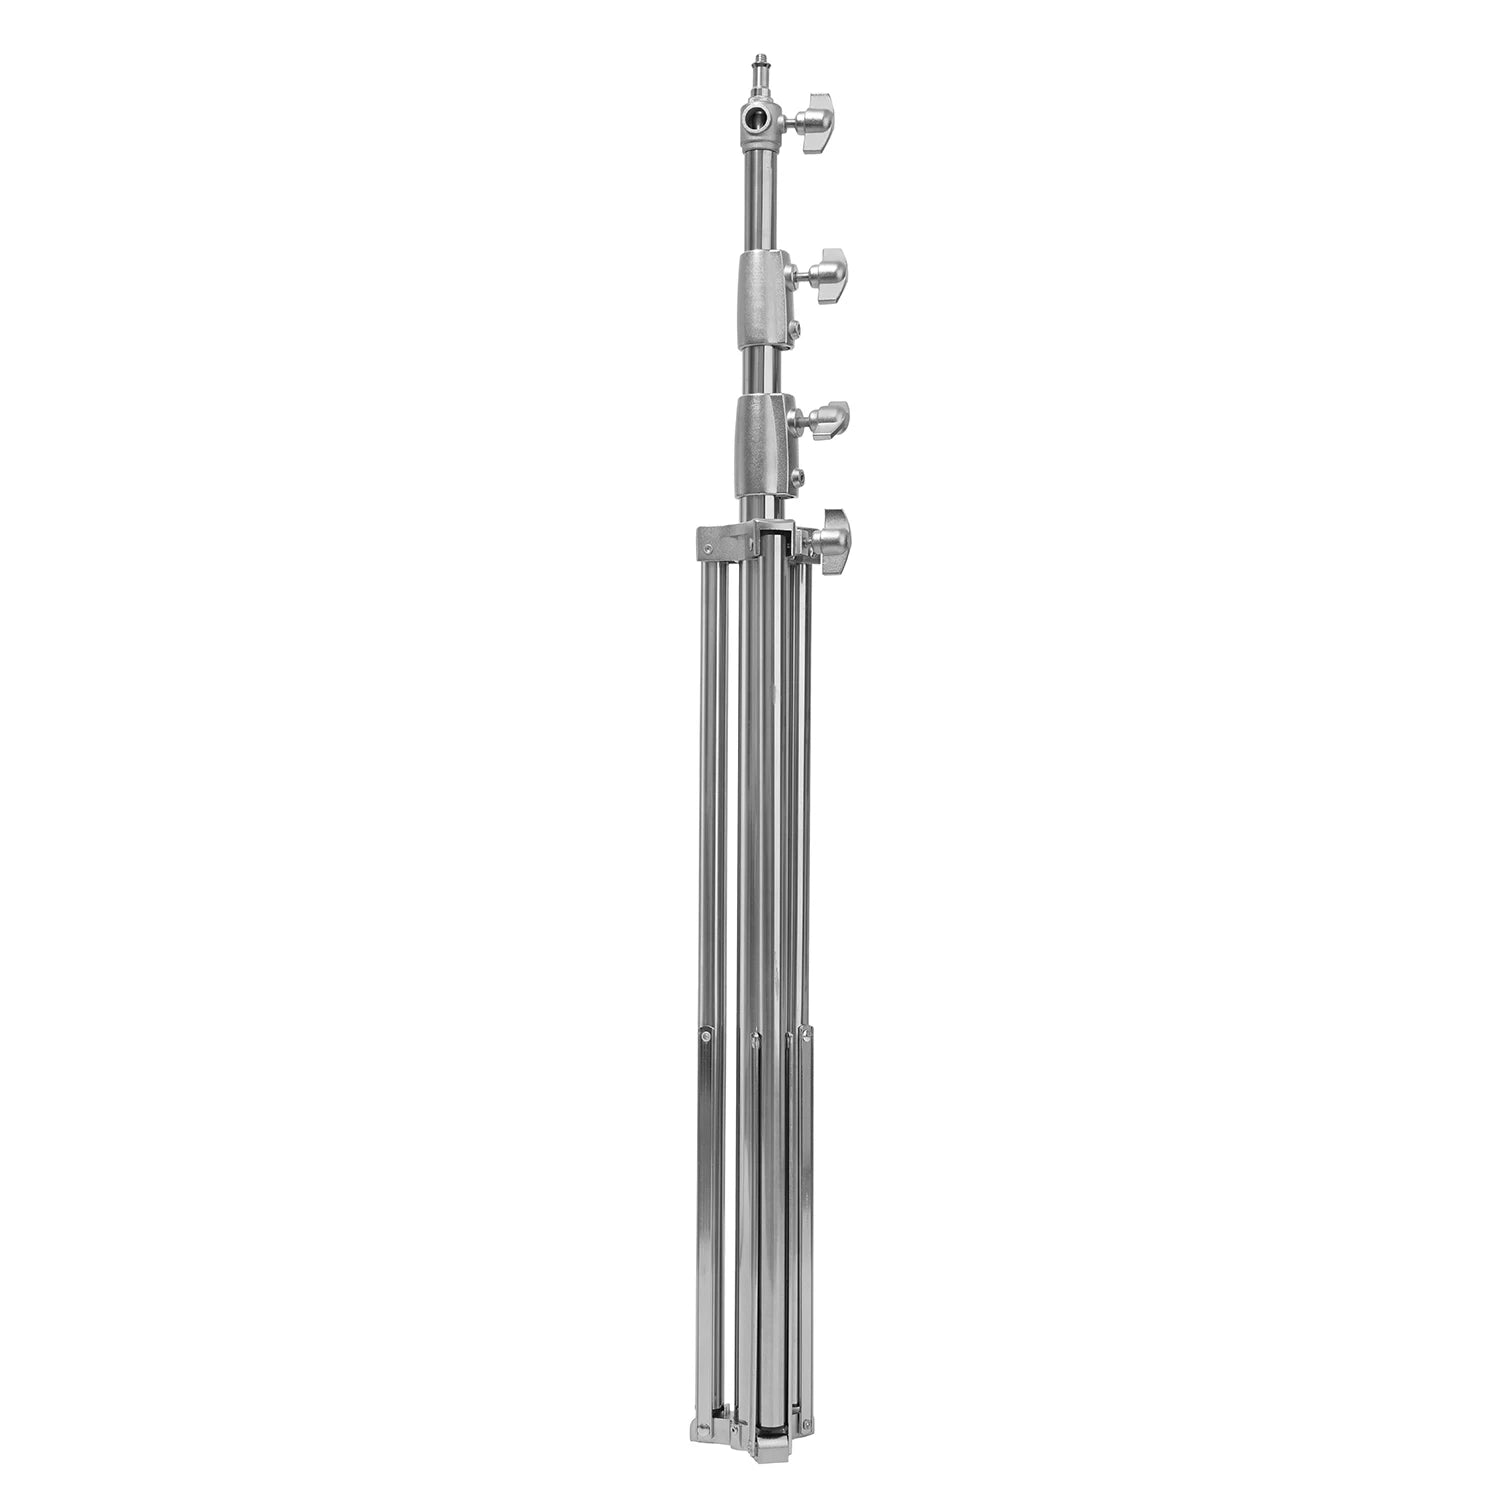 280cm Adjustable Stainless Steel Light Stand: Heavy-Duty, Universal Fit